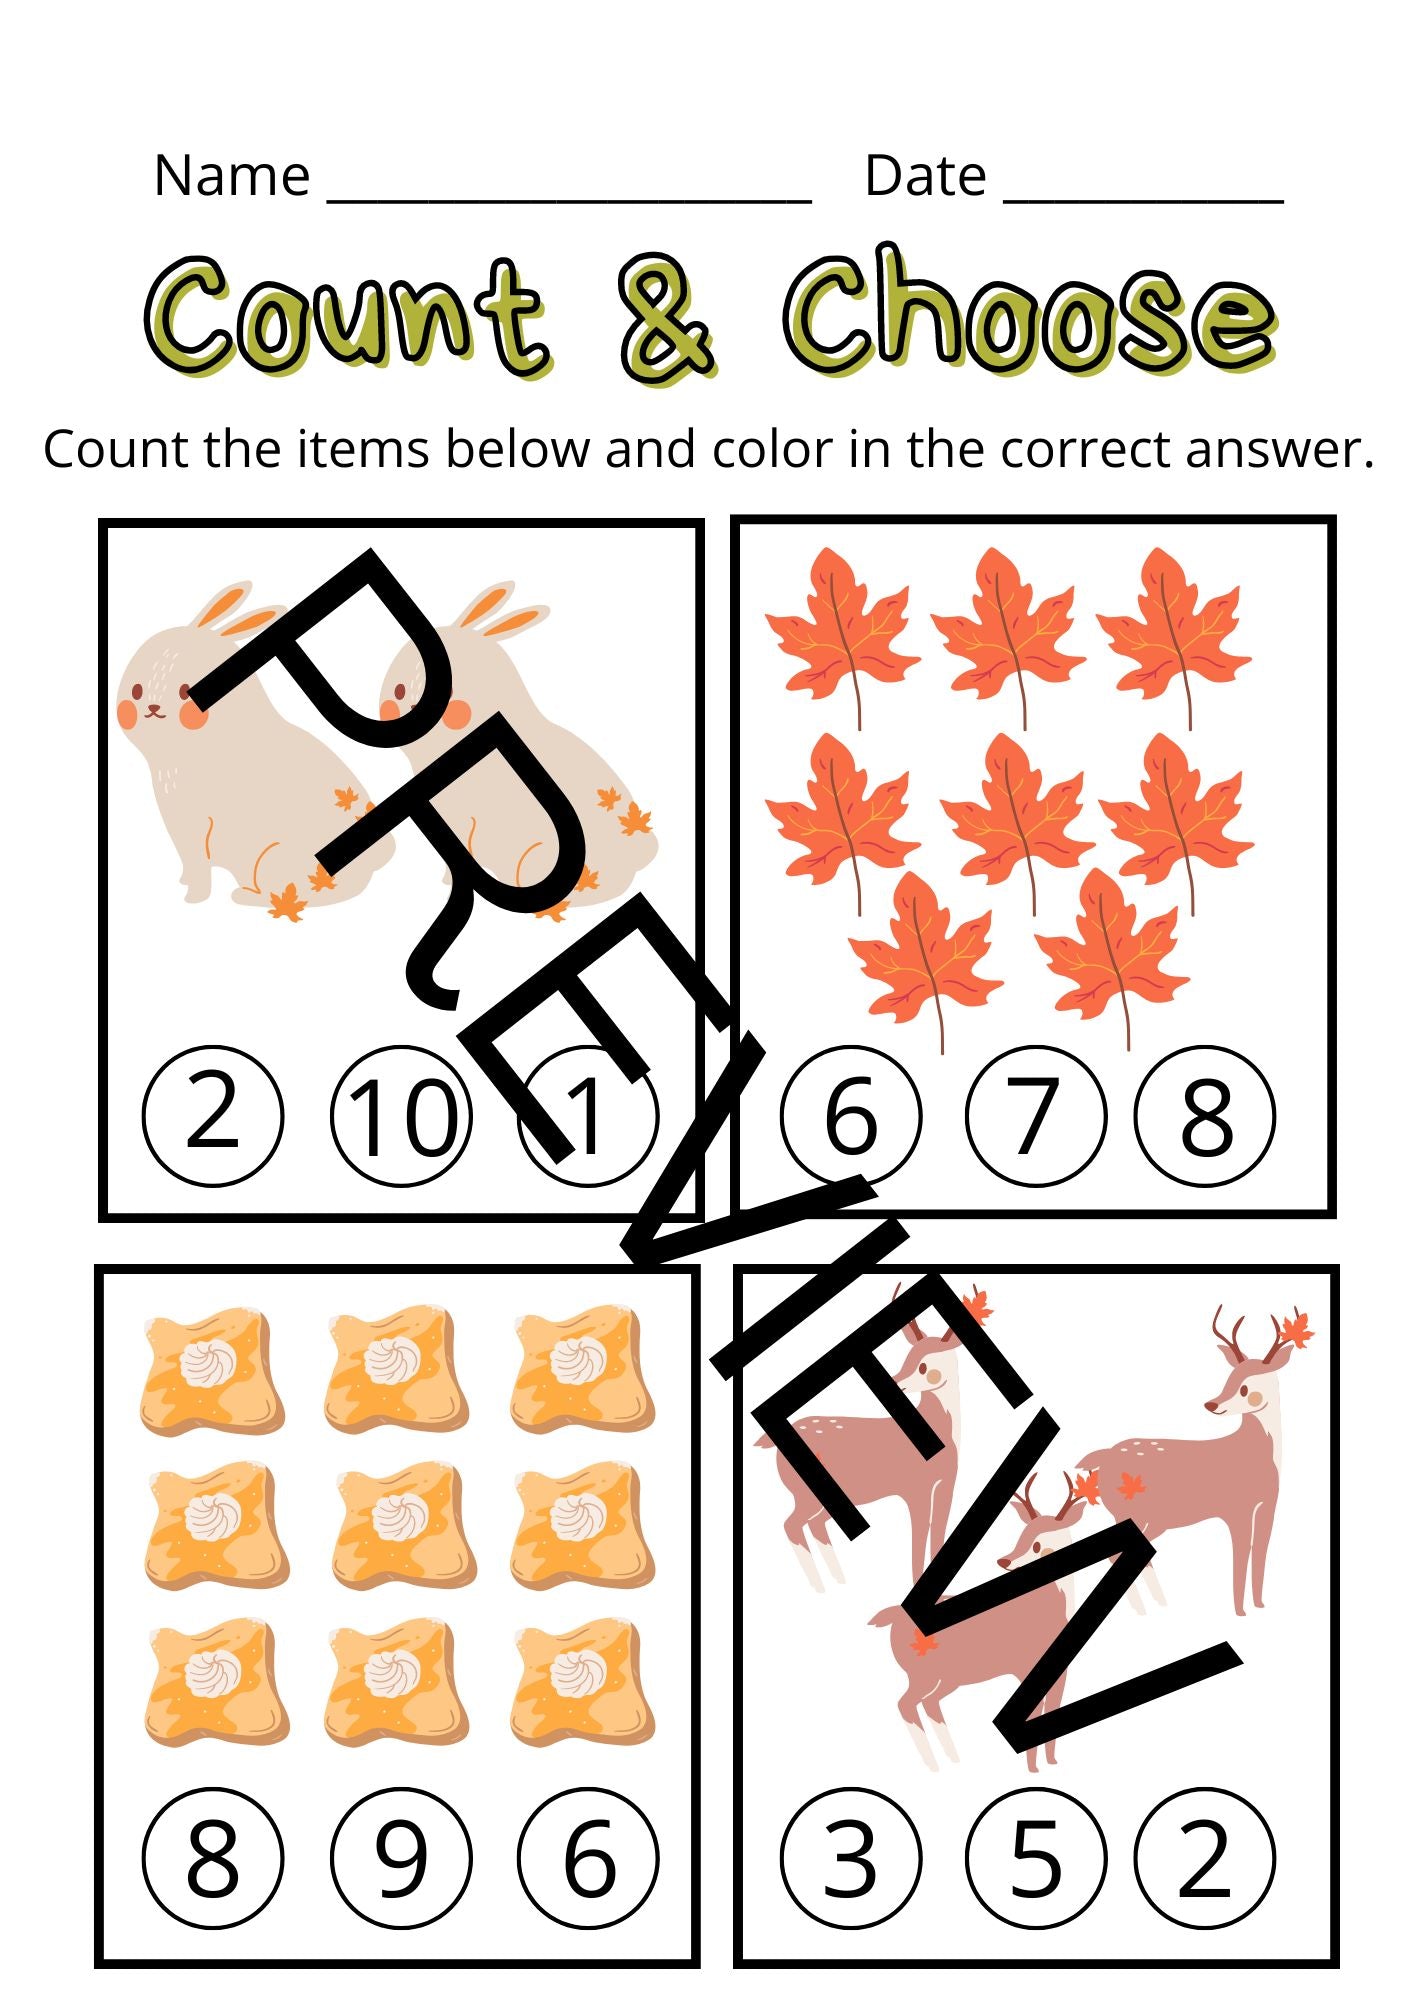 Count & Choose - Fall Edition